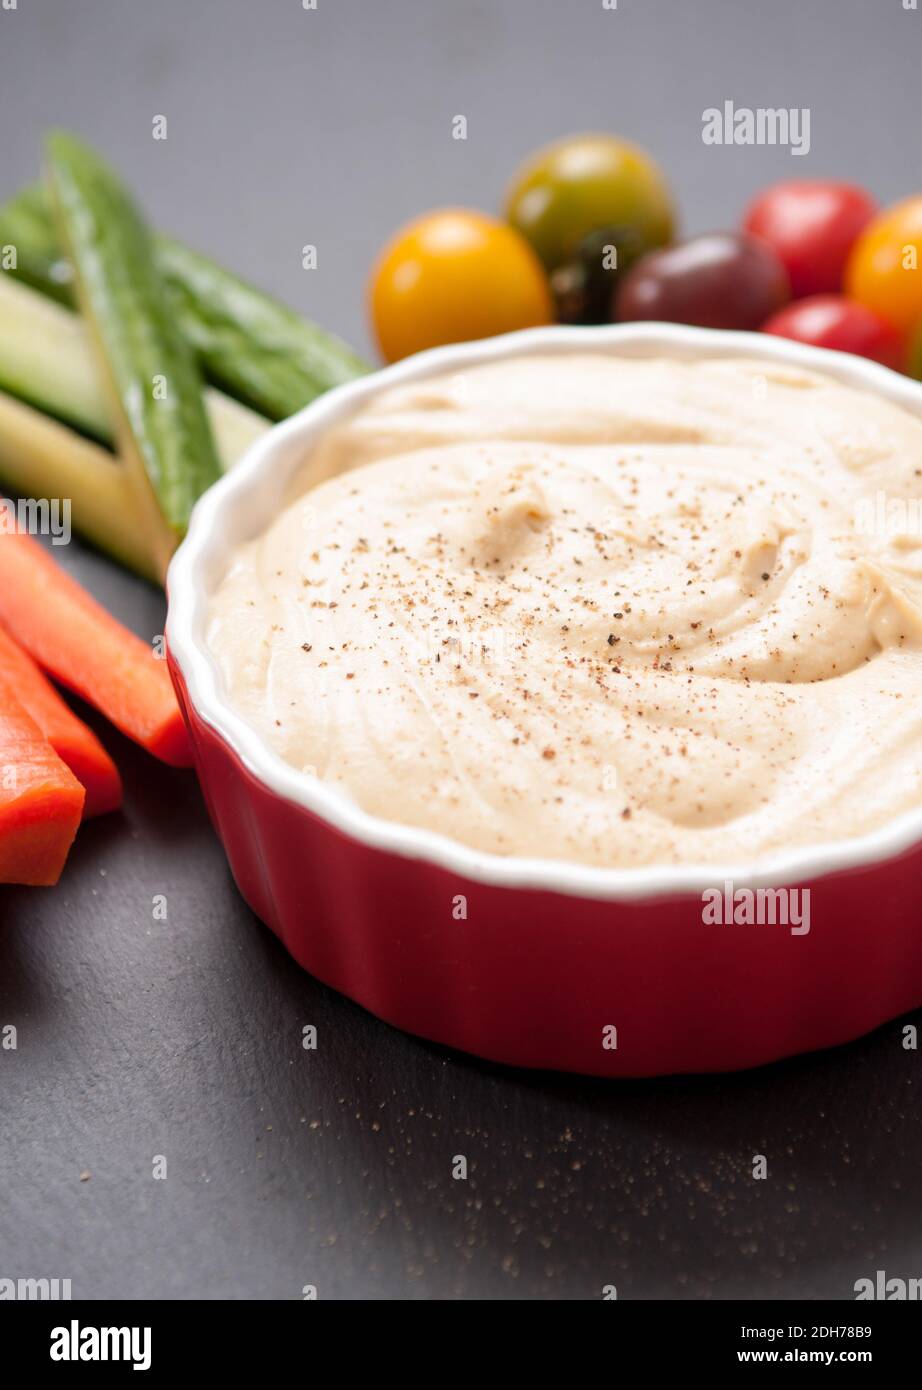 ground chickpea hummus with flatbreads and vegetables for dipping Stock Photo